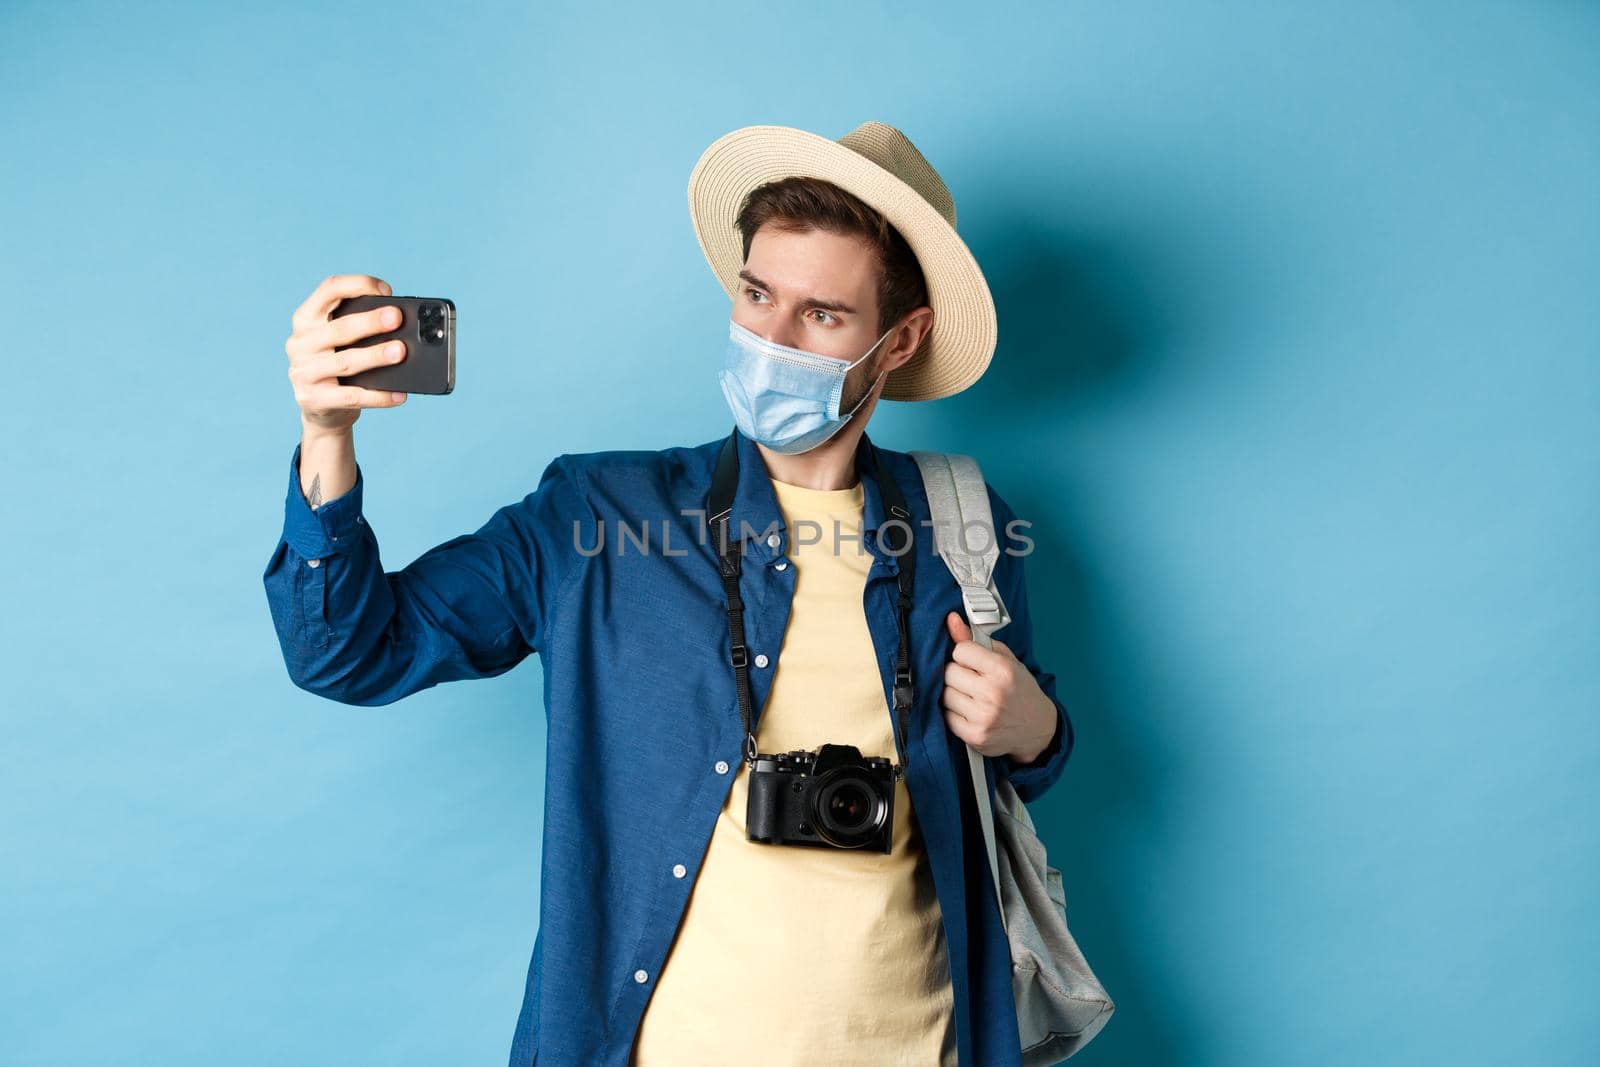 Covid-19, pandemic and travel concept. Male tourist in straw hat and medical mask recording video on smartphone during vacation, taking pics on summer holiday, blue background.